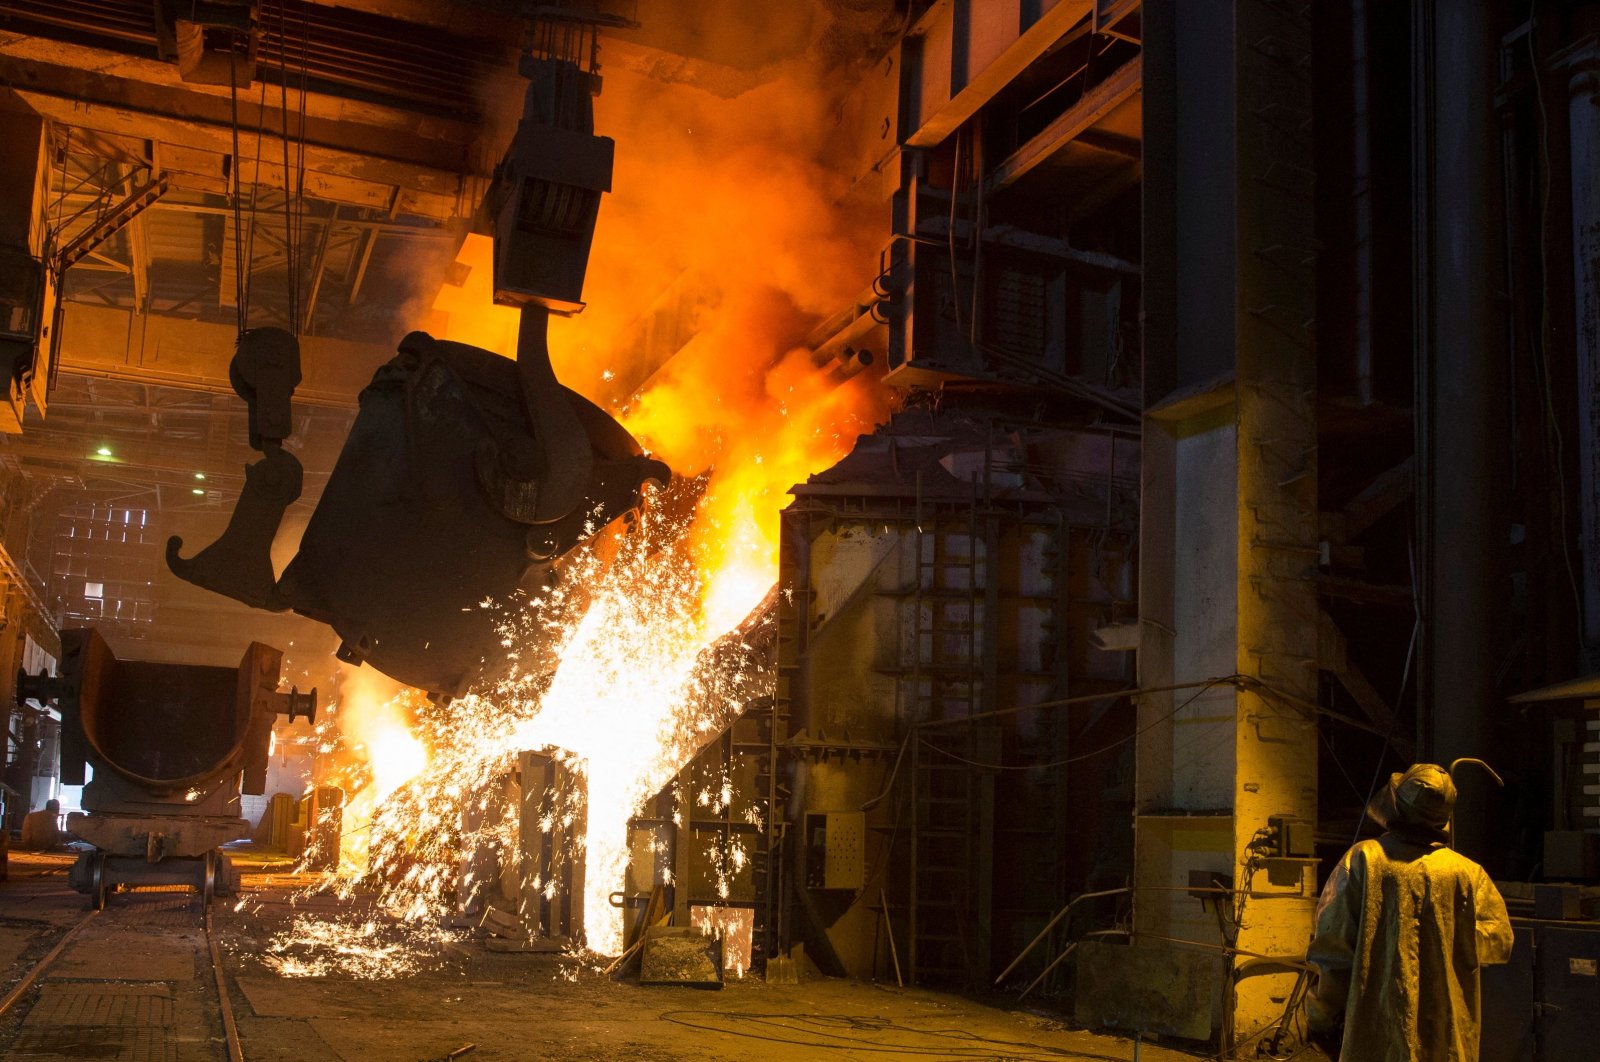 A steelworker operates machinery at the Ilich iron and steel plant in the southern coastal town of Mariupol, Ukraine, Sept. 2, 2014. (Reuters Photo)